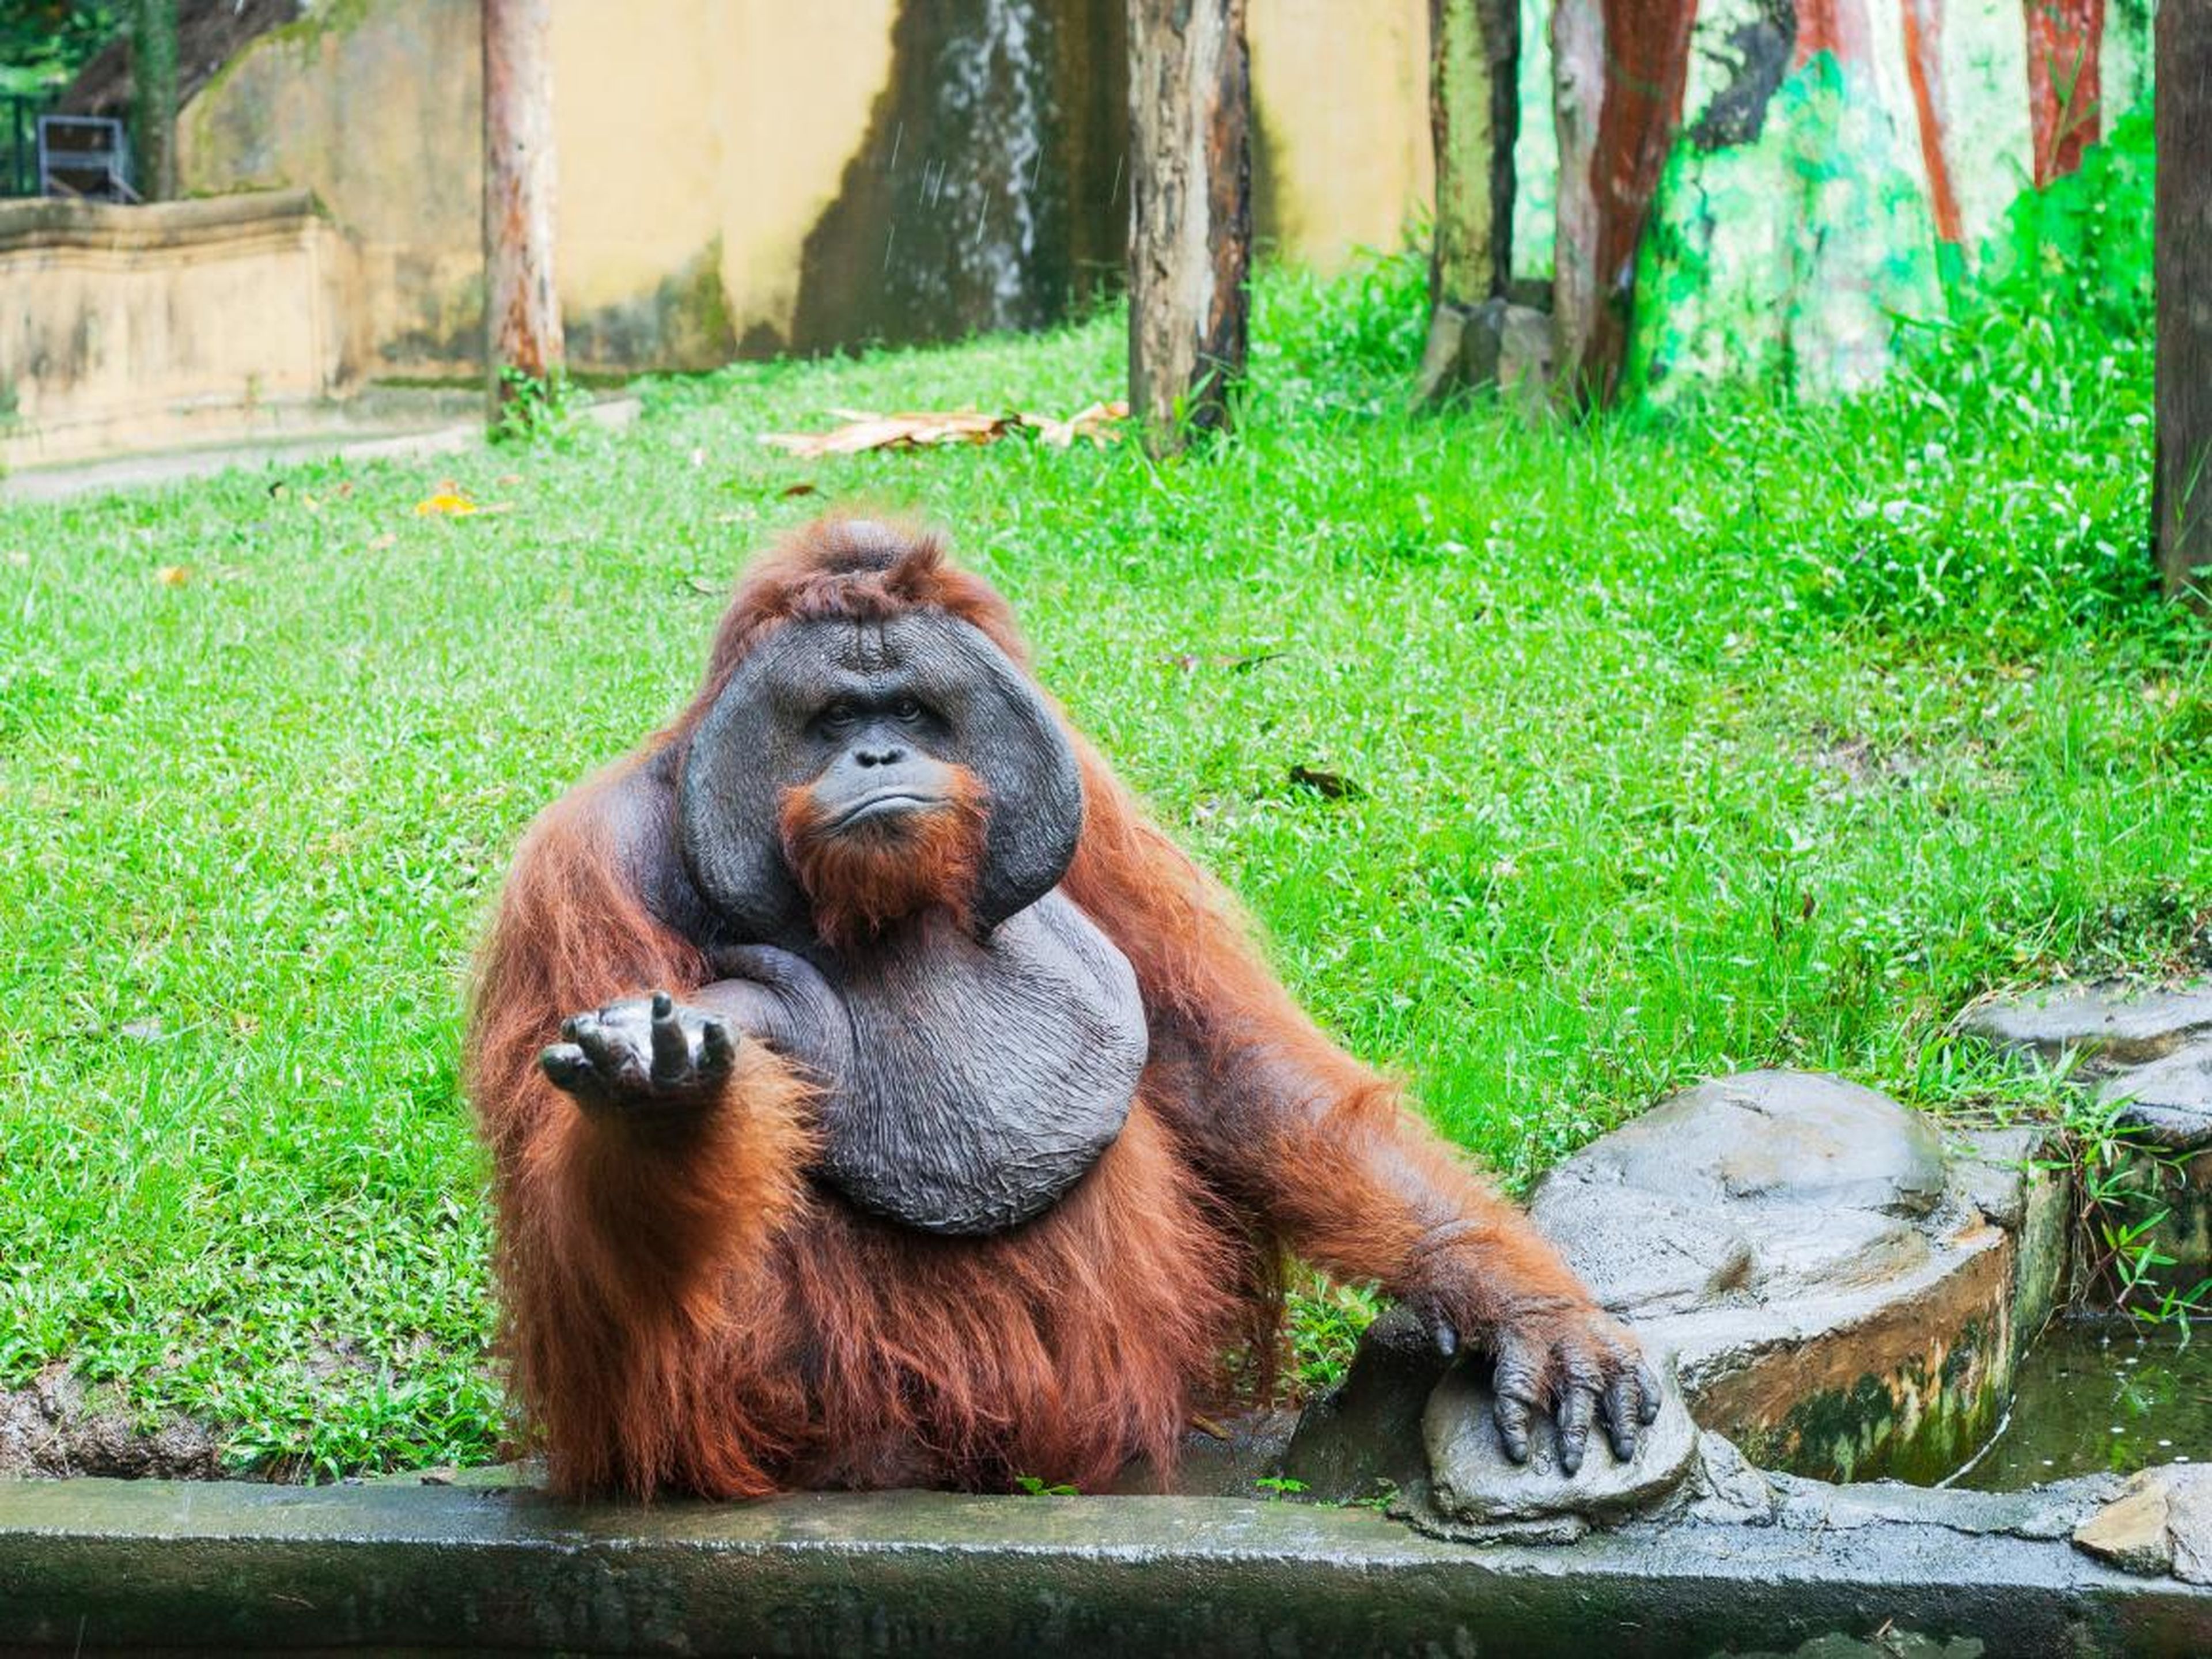 ... and this orangutan doesn't seem to know what's up.